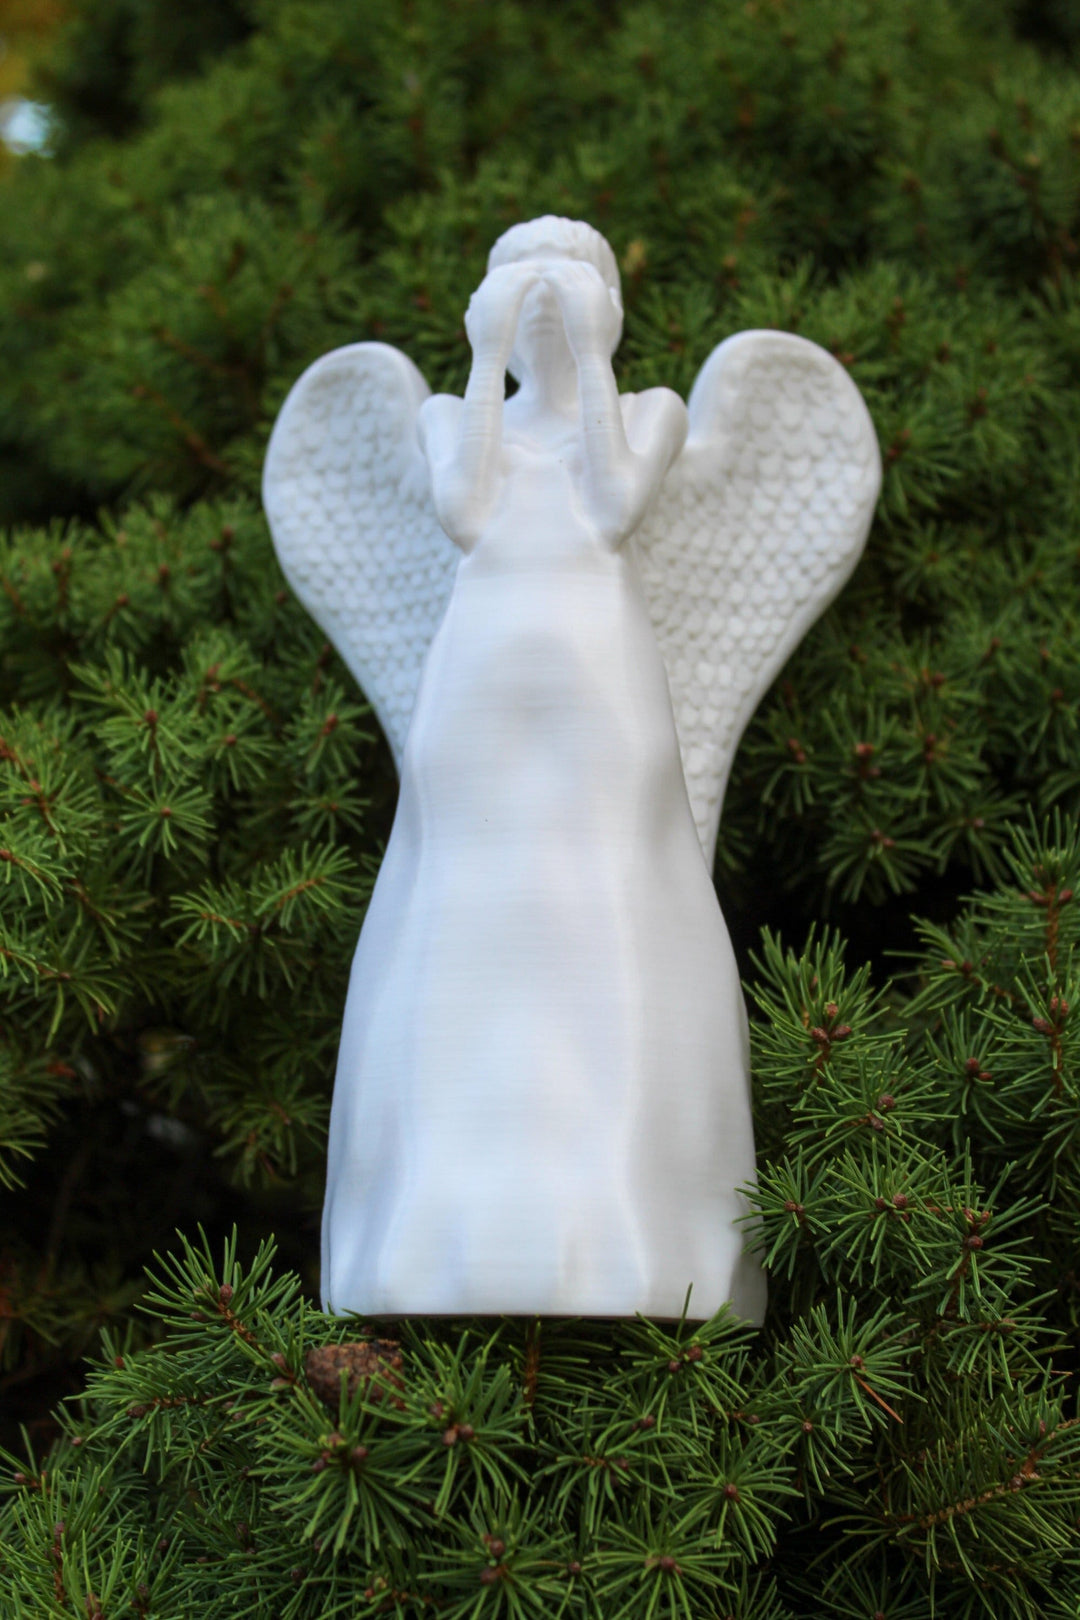 
  
  Weeping Angel Christmas Tree Topper from Doctor Who for Whovians | 7" tall
  
